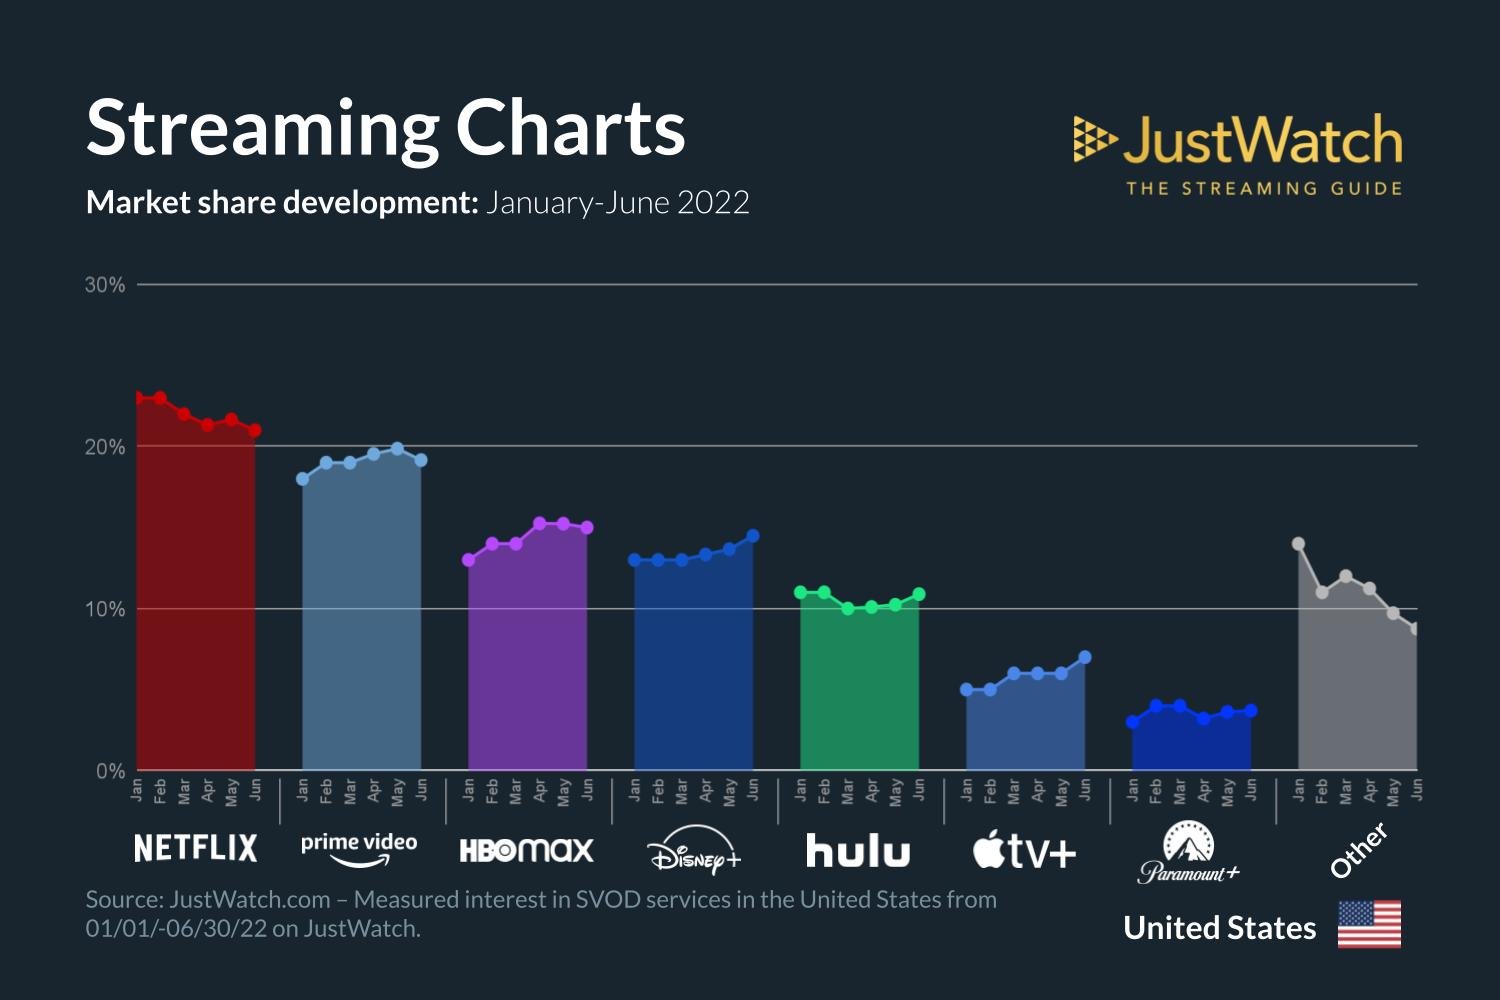 JustWatch SVOD market shares in Q2 2022 — Every Movie Has a Lesson